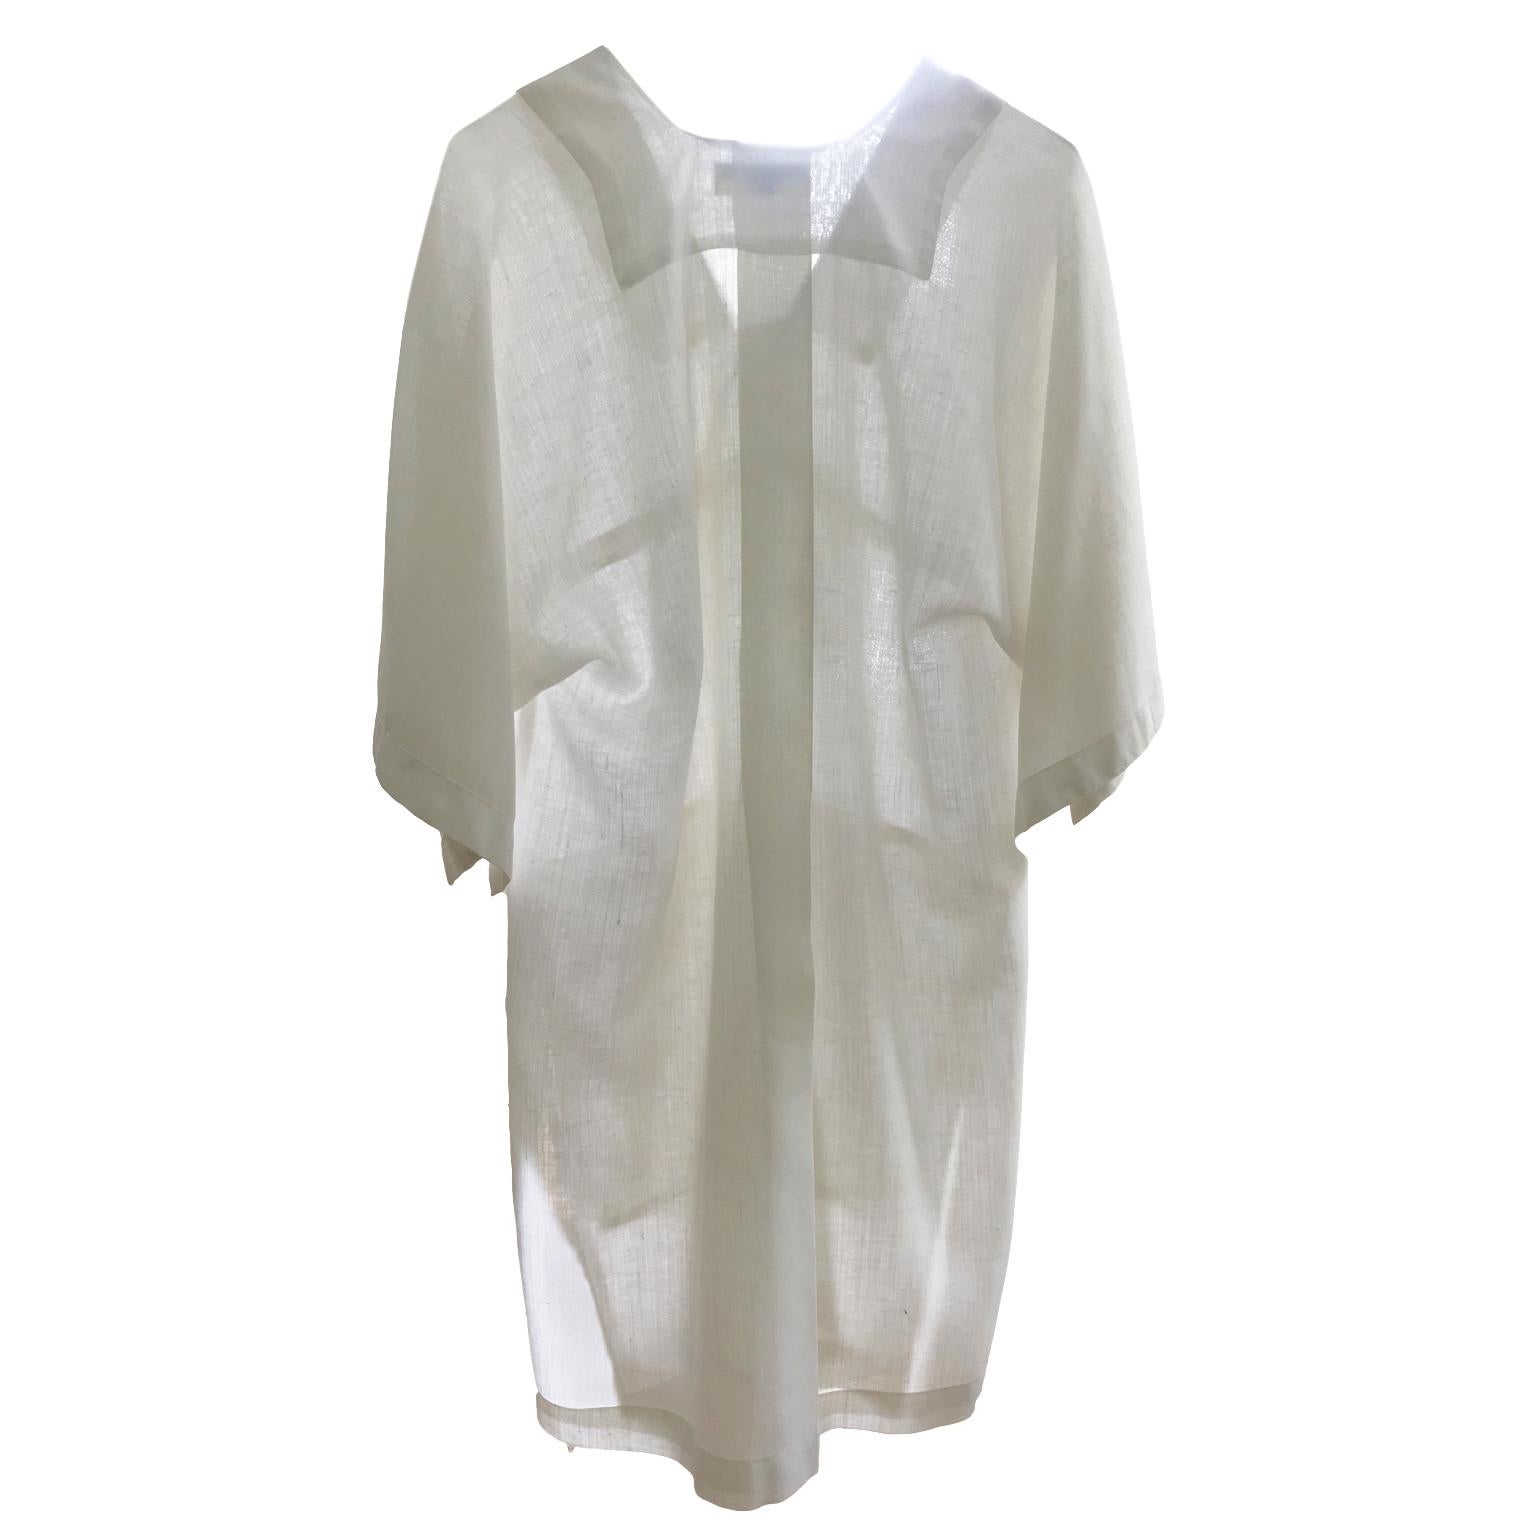 Issey Miyake kaftan / Dress Shirt from circa 1973. Rare find early Issey Miyake piece.
Dolman sleeve :  47 cm (from neck point)
Length back : 88 cm
Width : 49 cm


